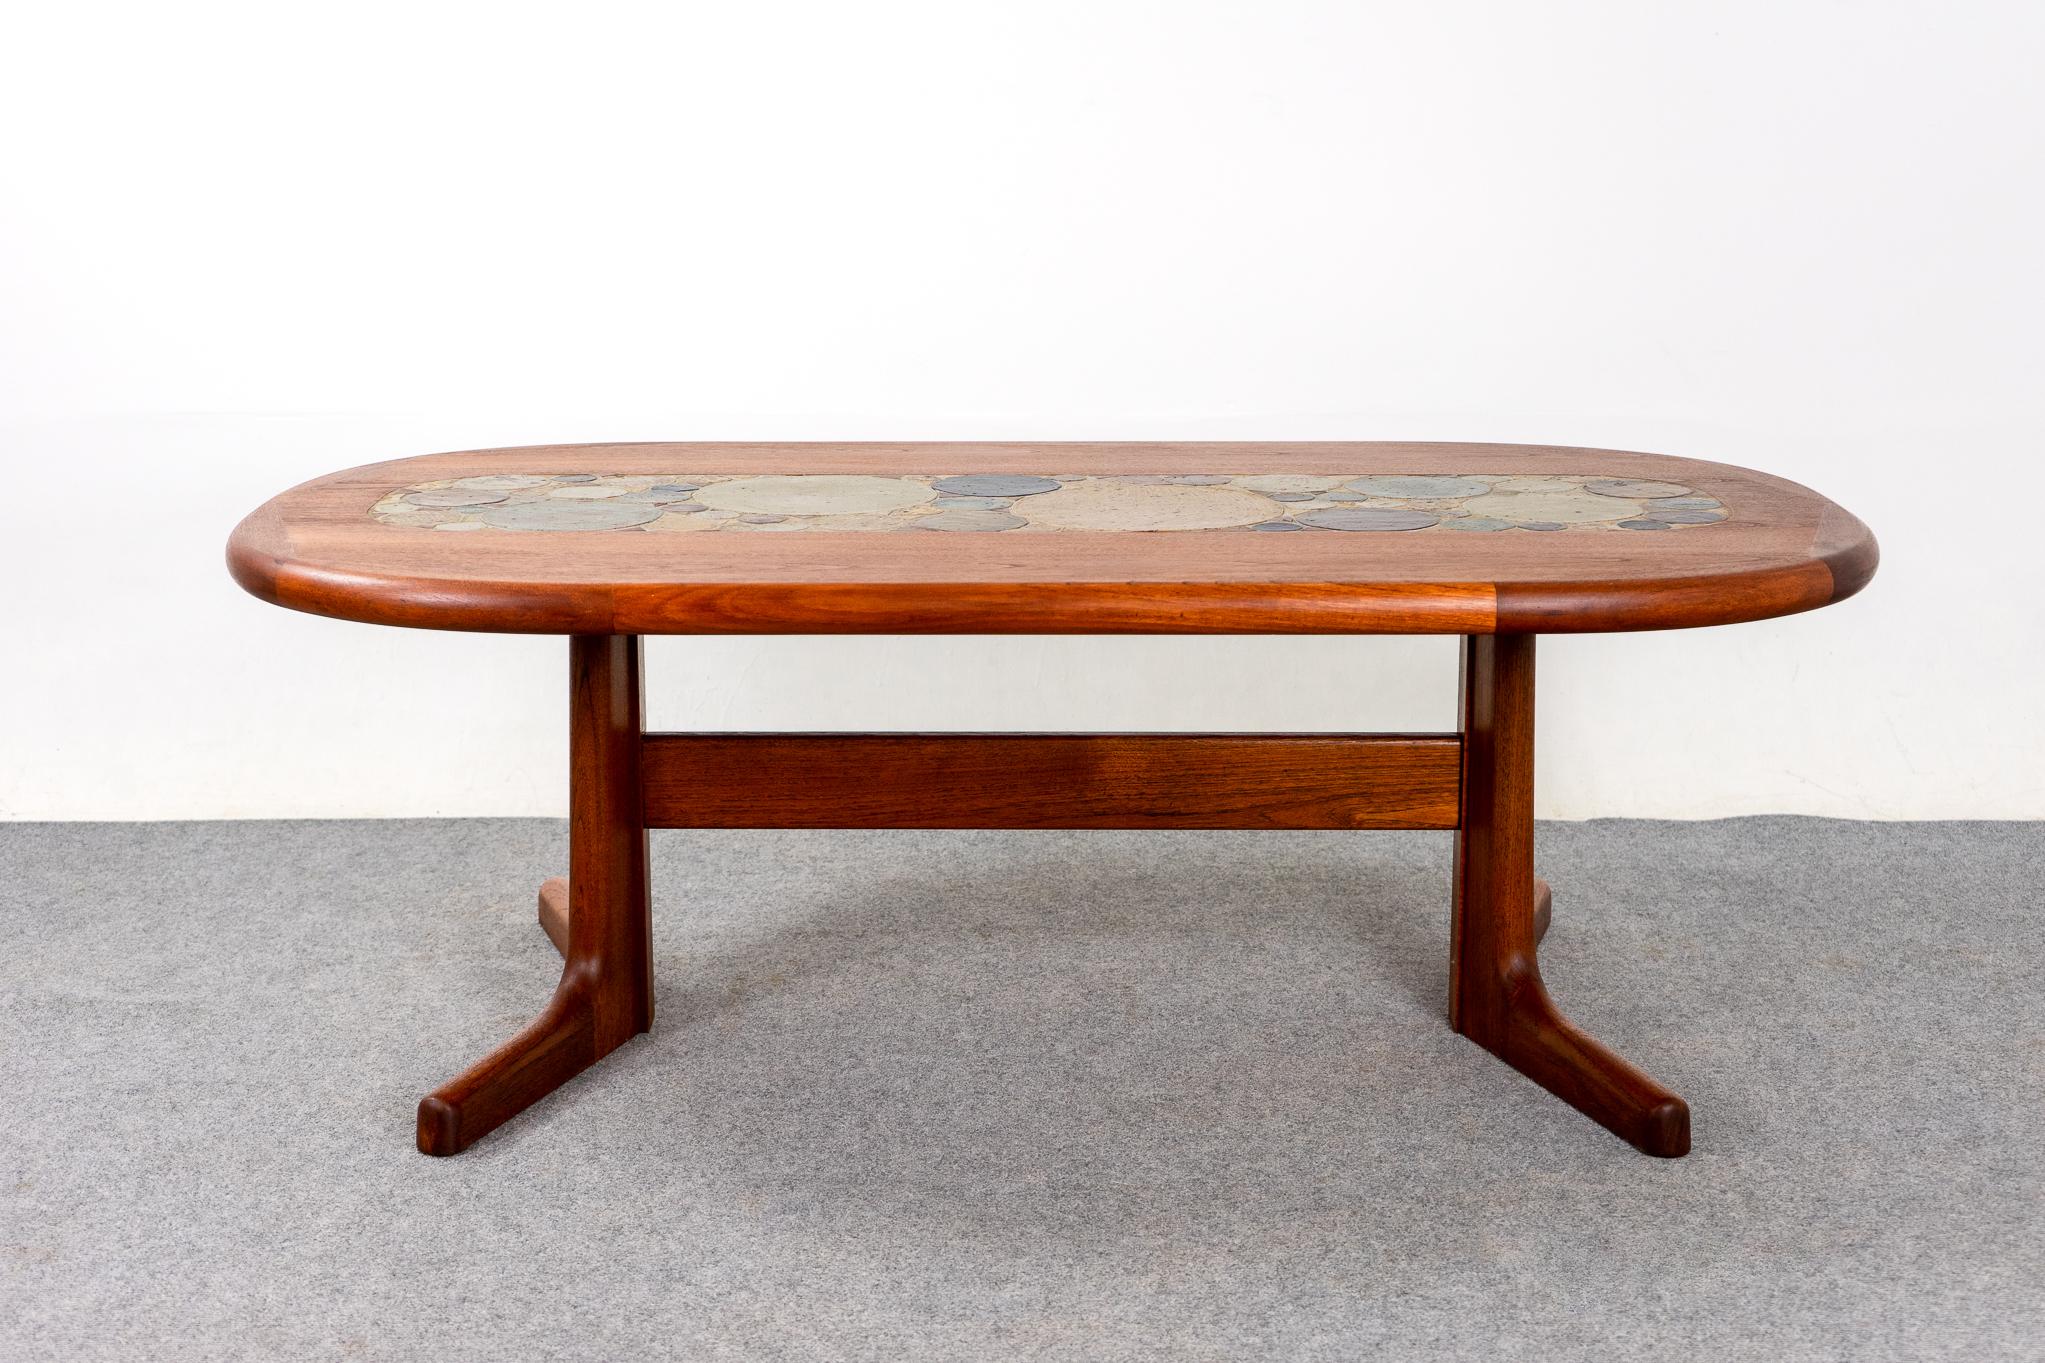 Teak and ceramic Danish modern coffee table by Tue Poulsen, circa 1970's. Robust coffee table with unique solid scalloped edge. Centre of the table has handmade circular tiles in a lovely pattern, think built-in trivet/coasters! Cross support